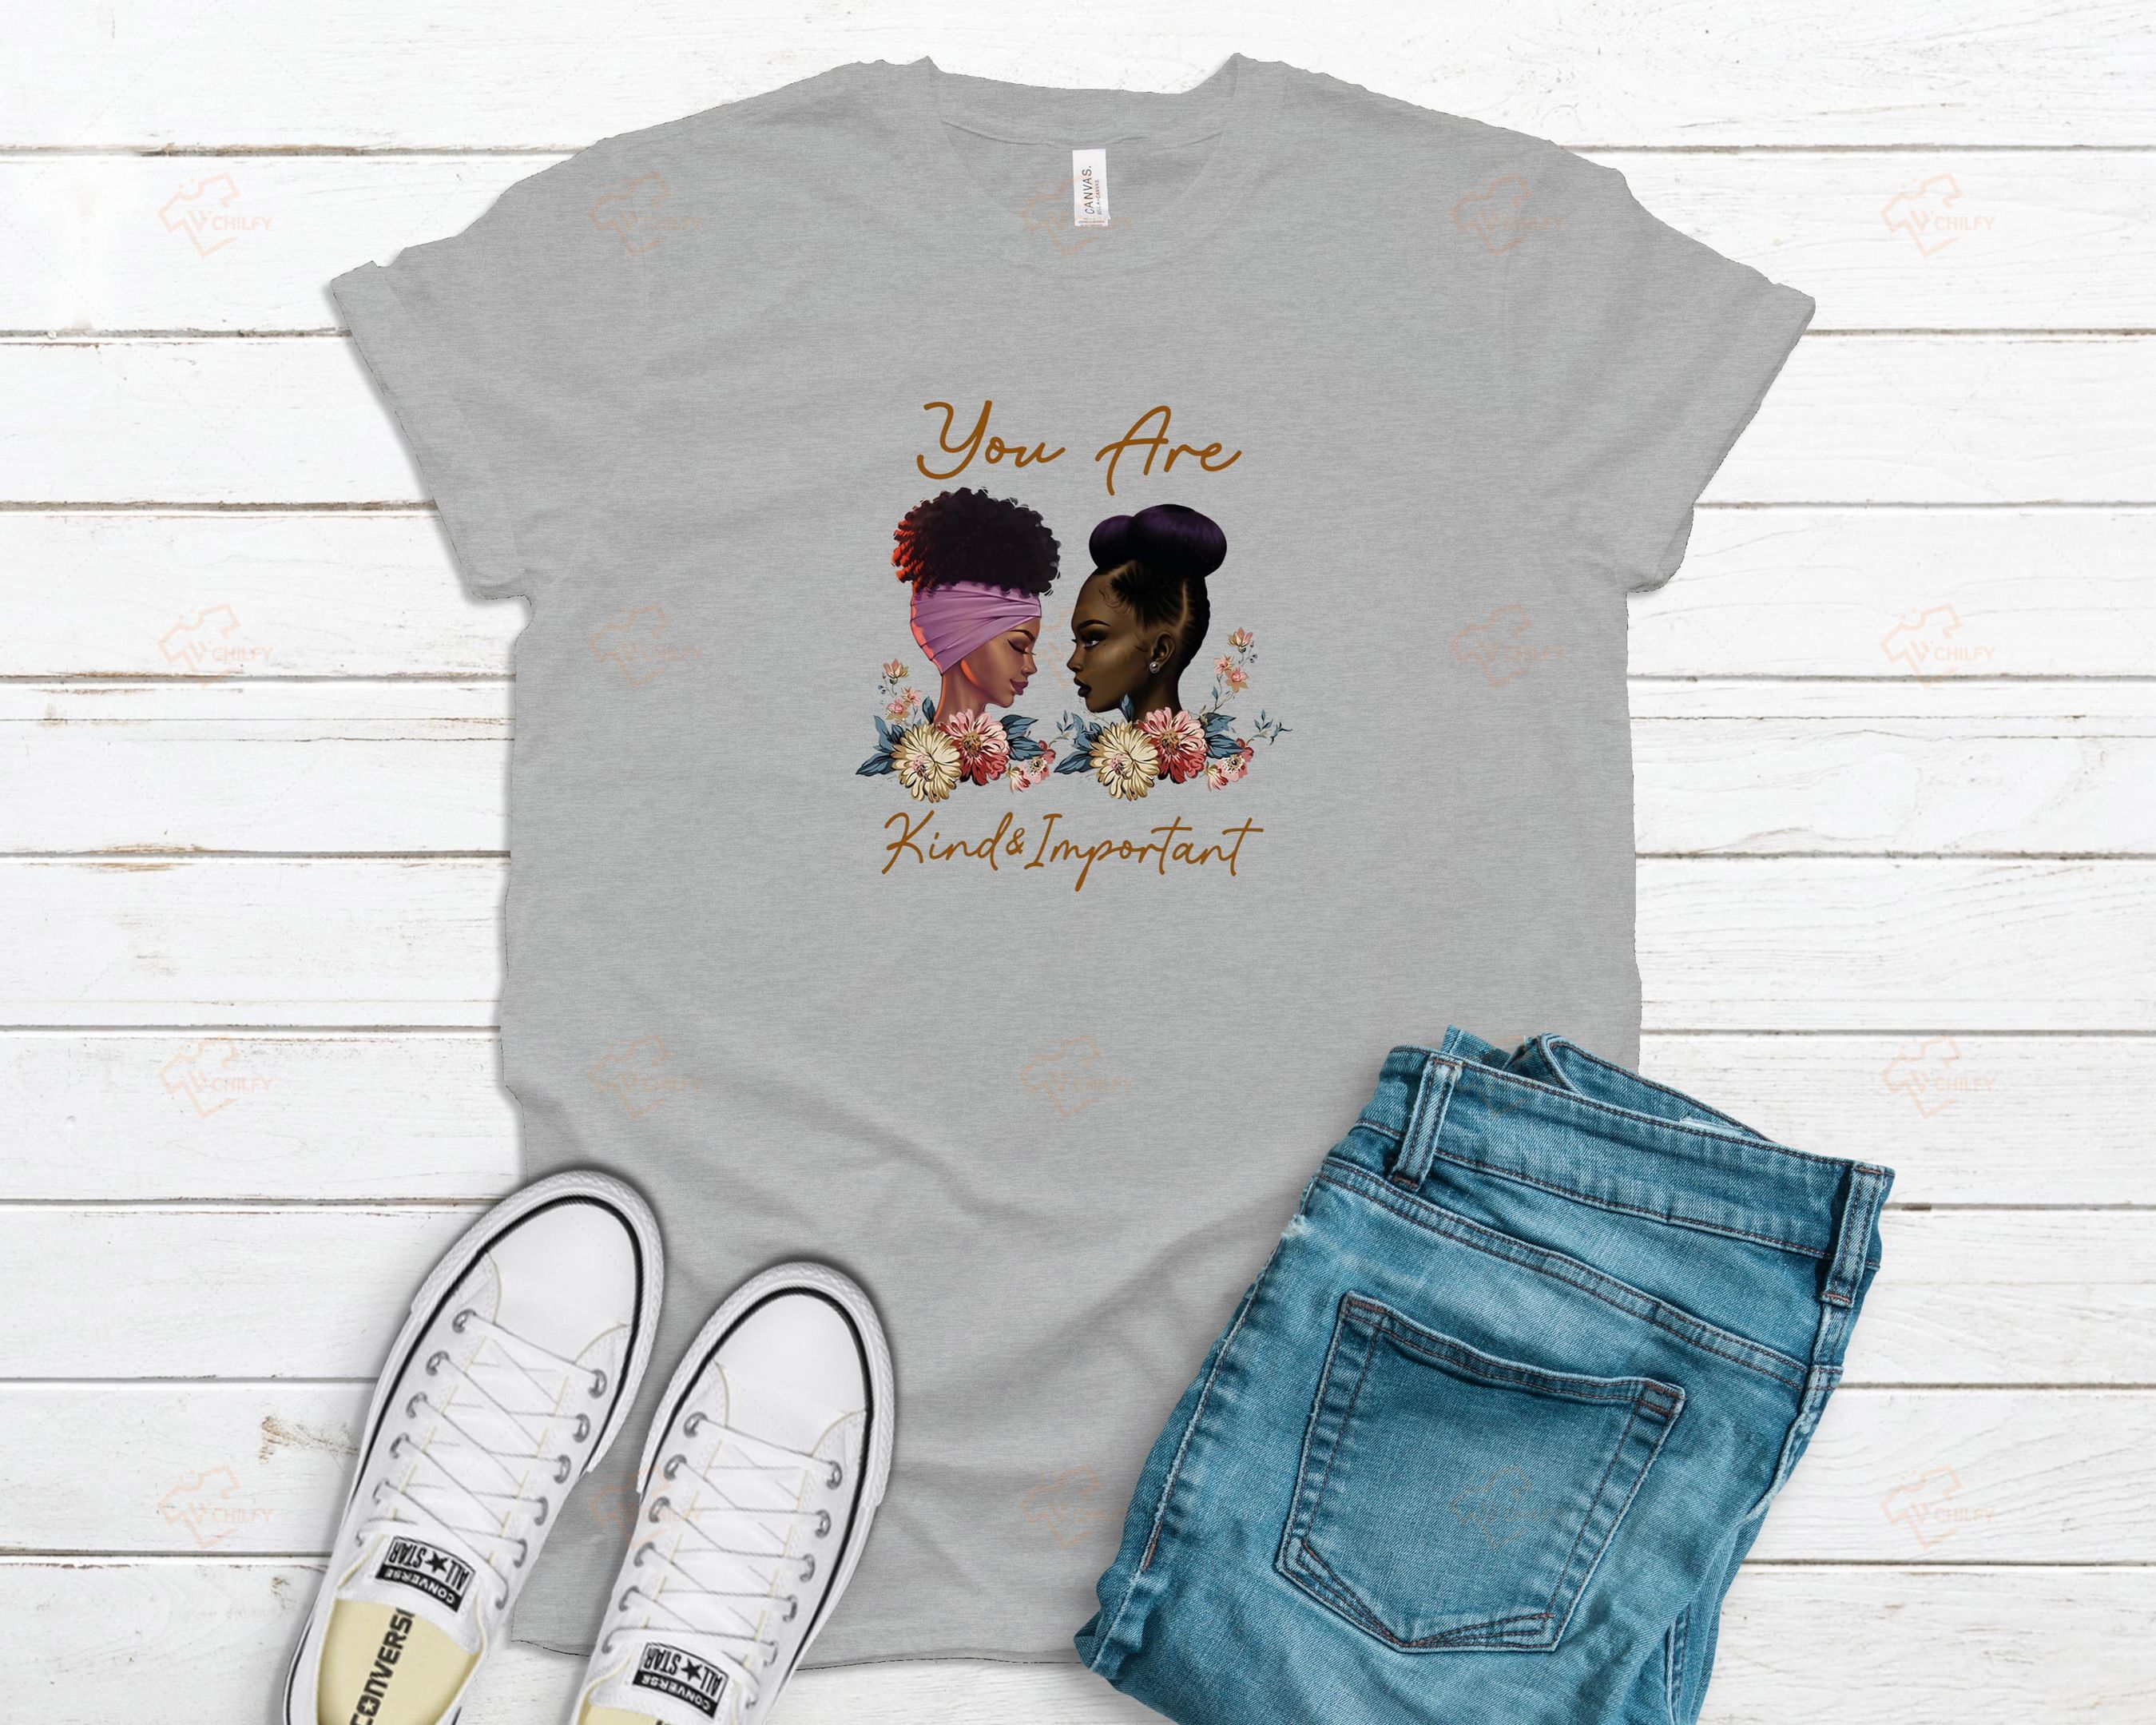 you are kind and important shirt, black girl shirt, afro girl shirt